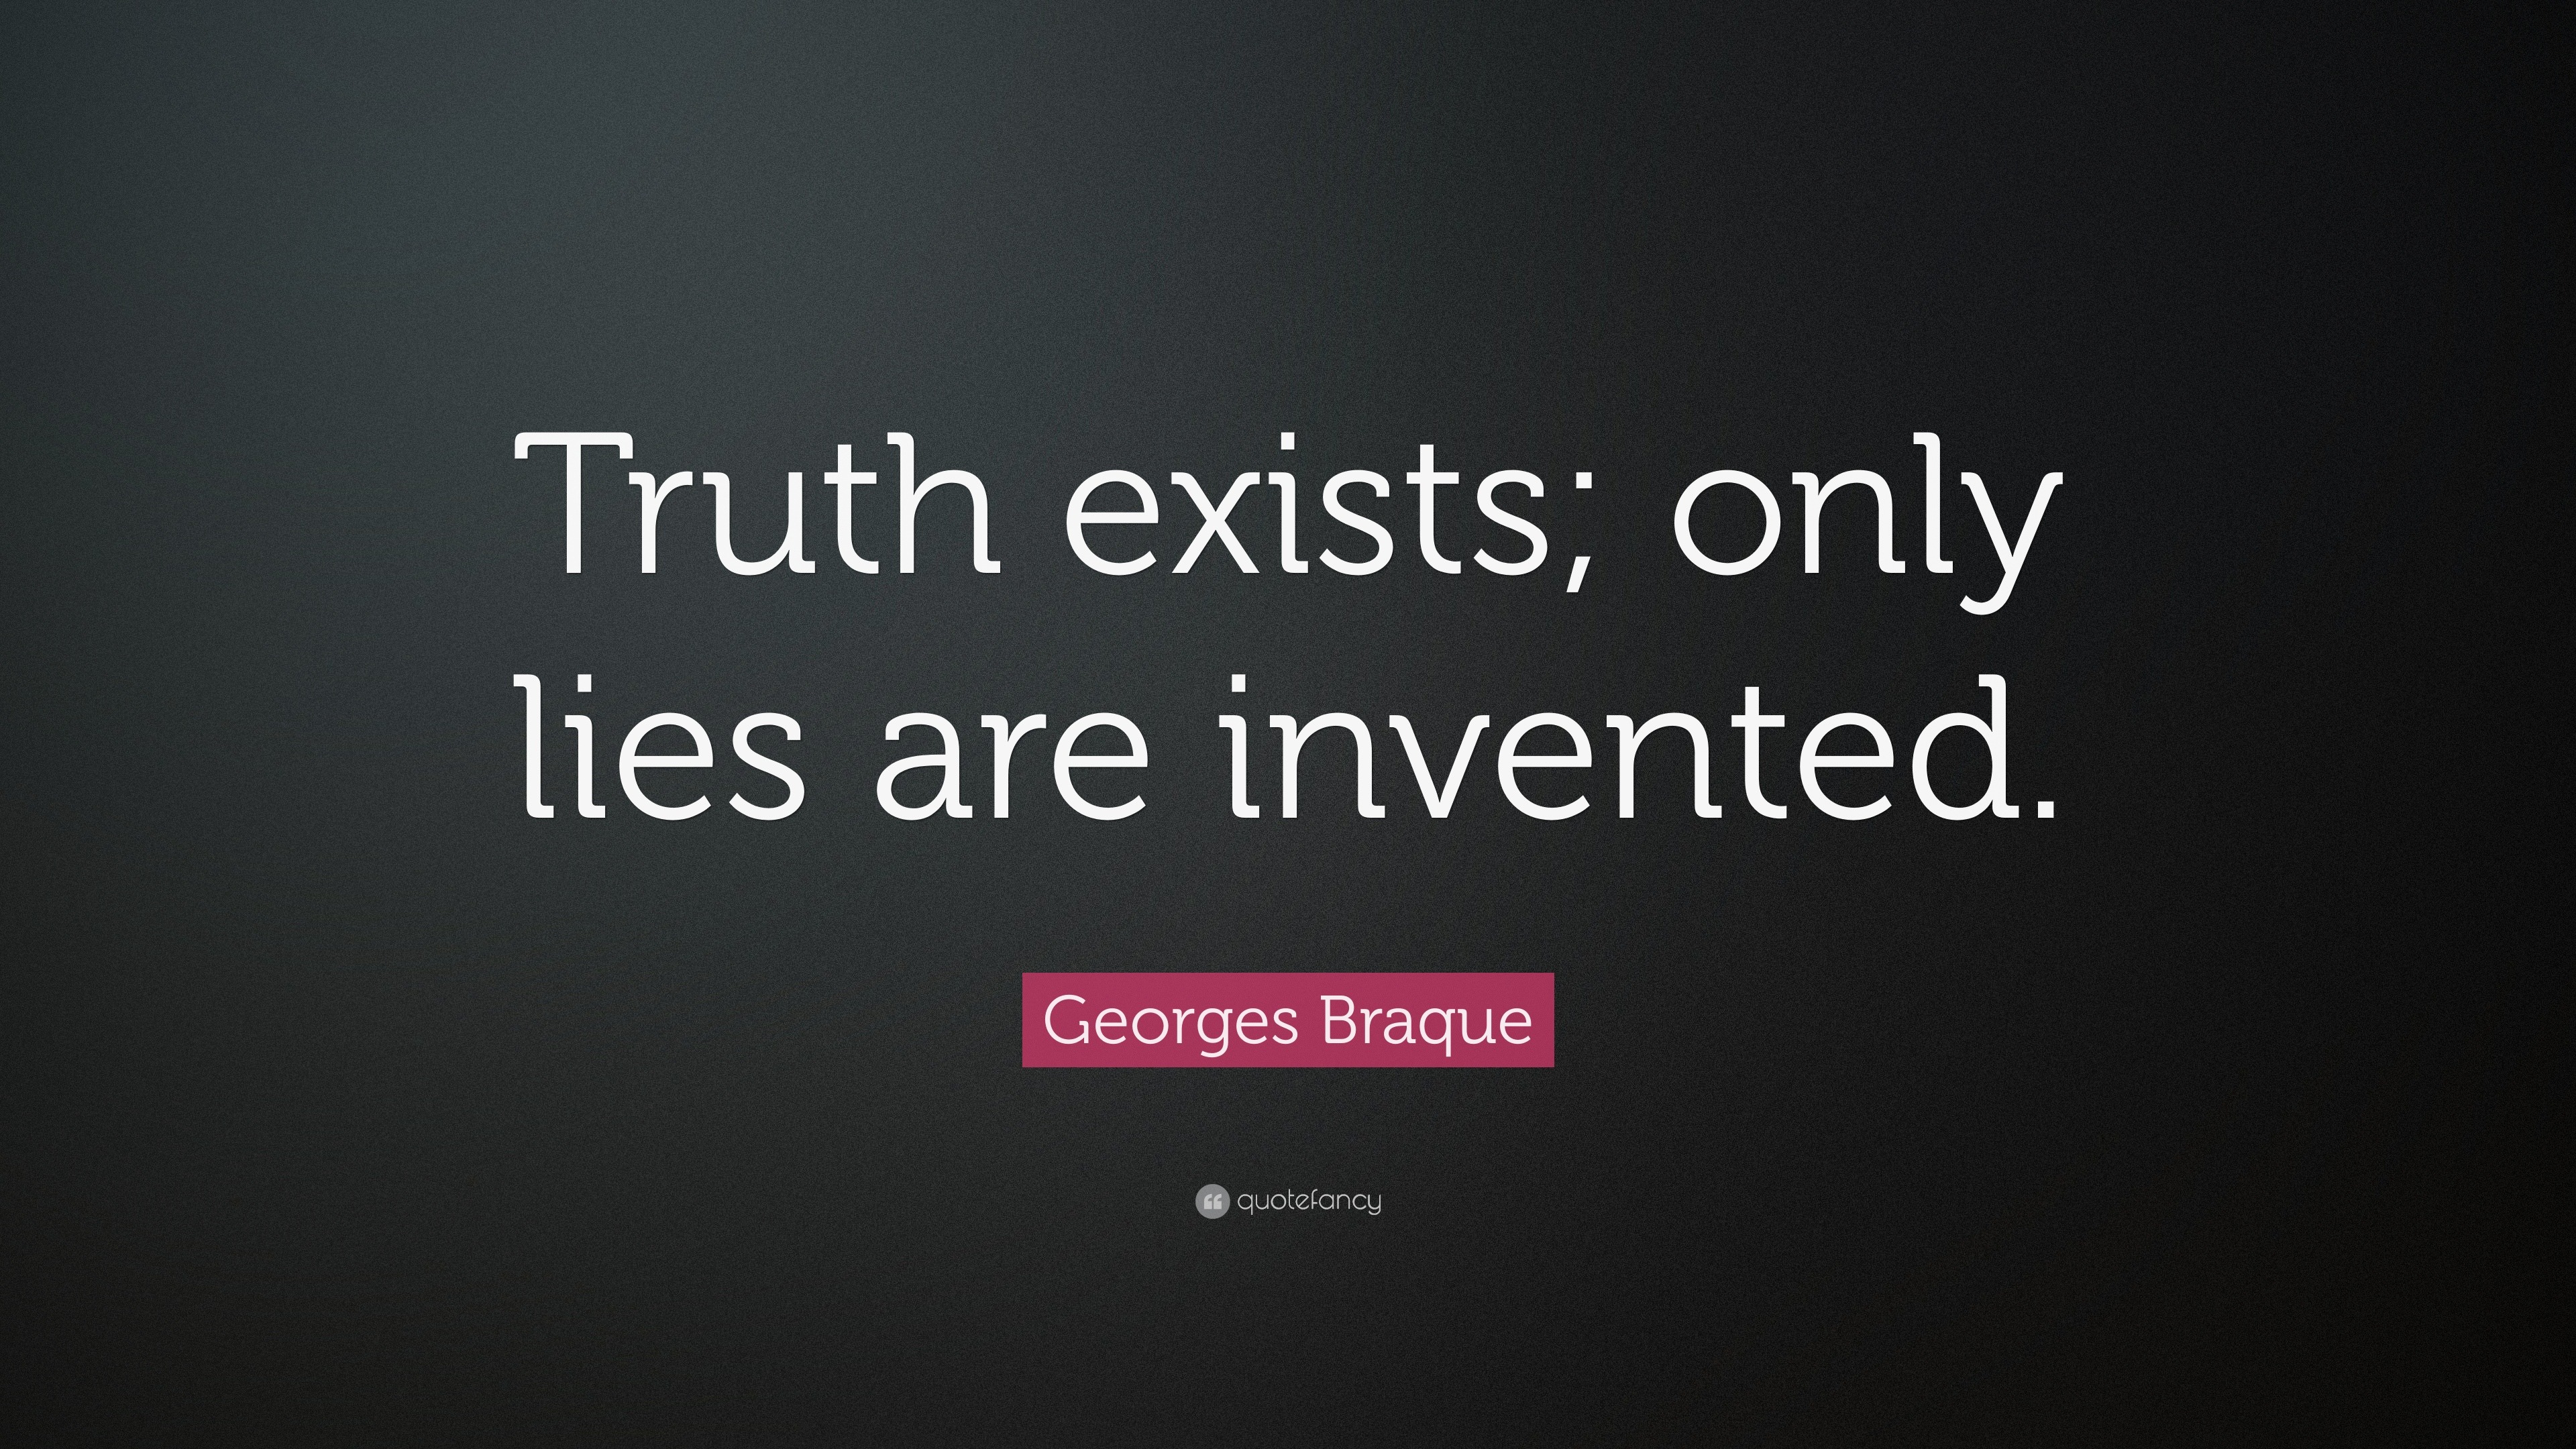 Or lie quotes truth Lies Sayings